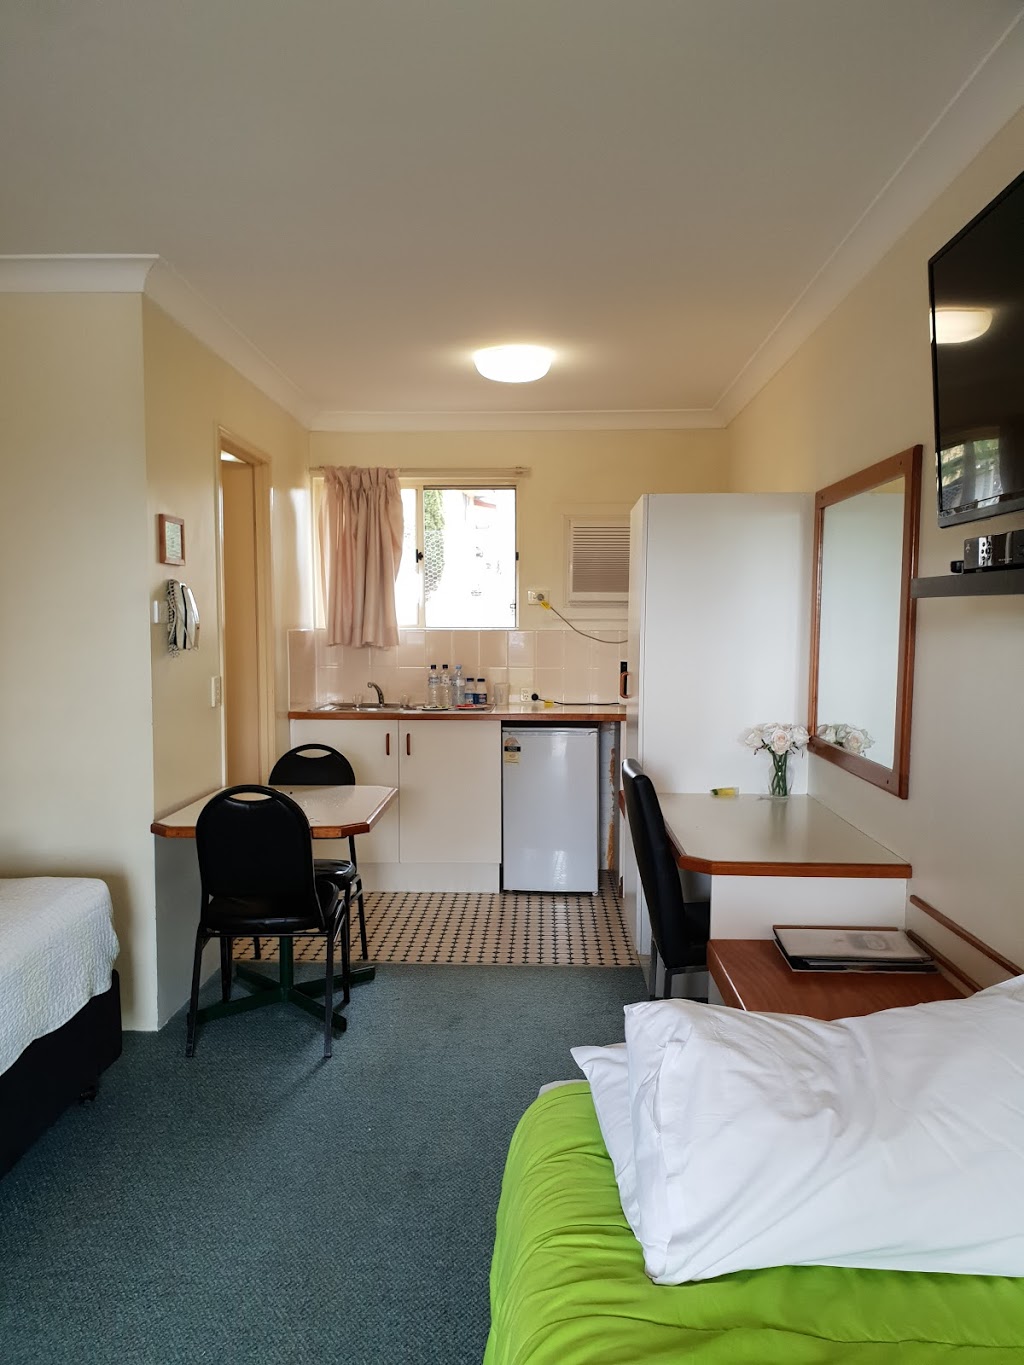 Country Rose Motel | lodging | 2 Palmer Ave, Warwick QLD 4370, Australia | 0746617700 OR +61 7 4661 7700